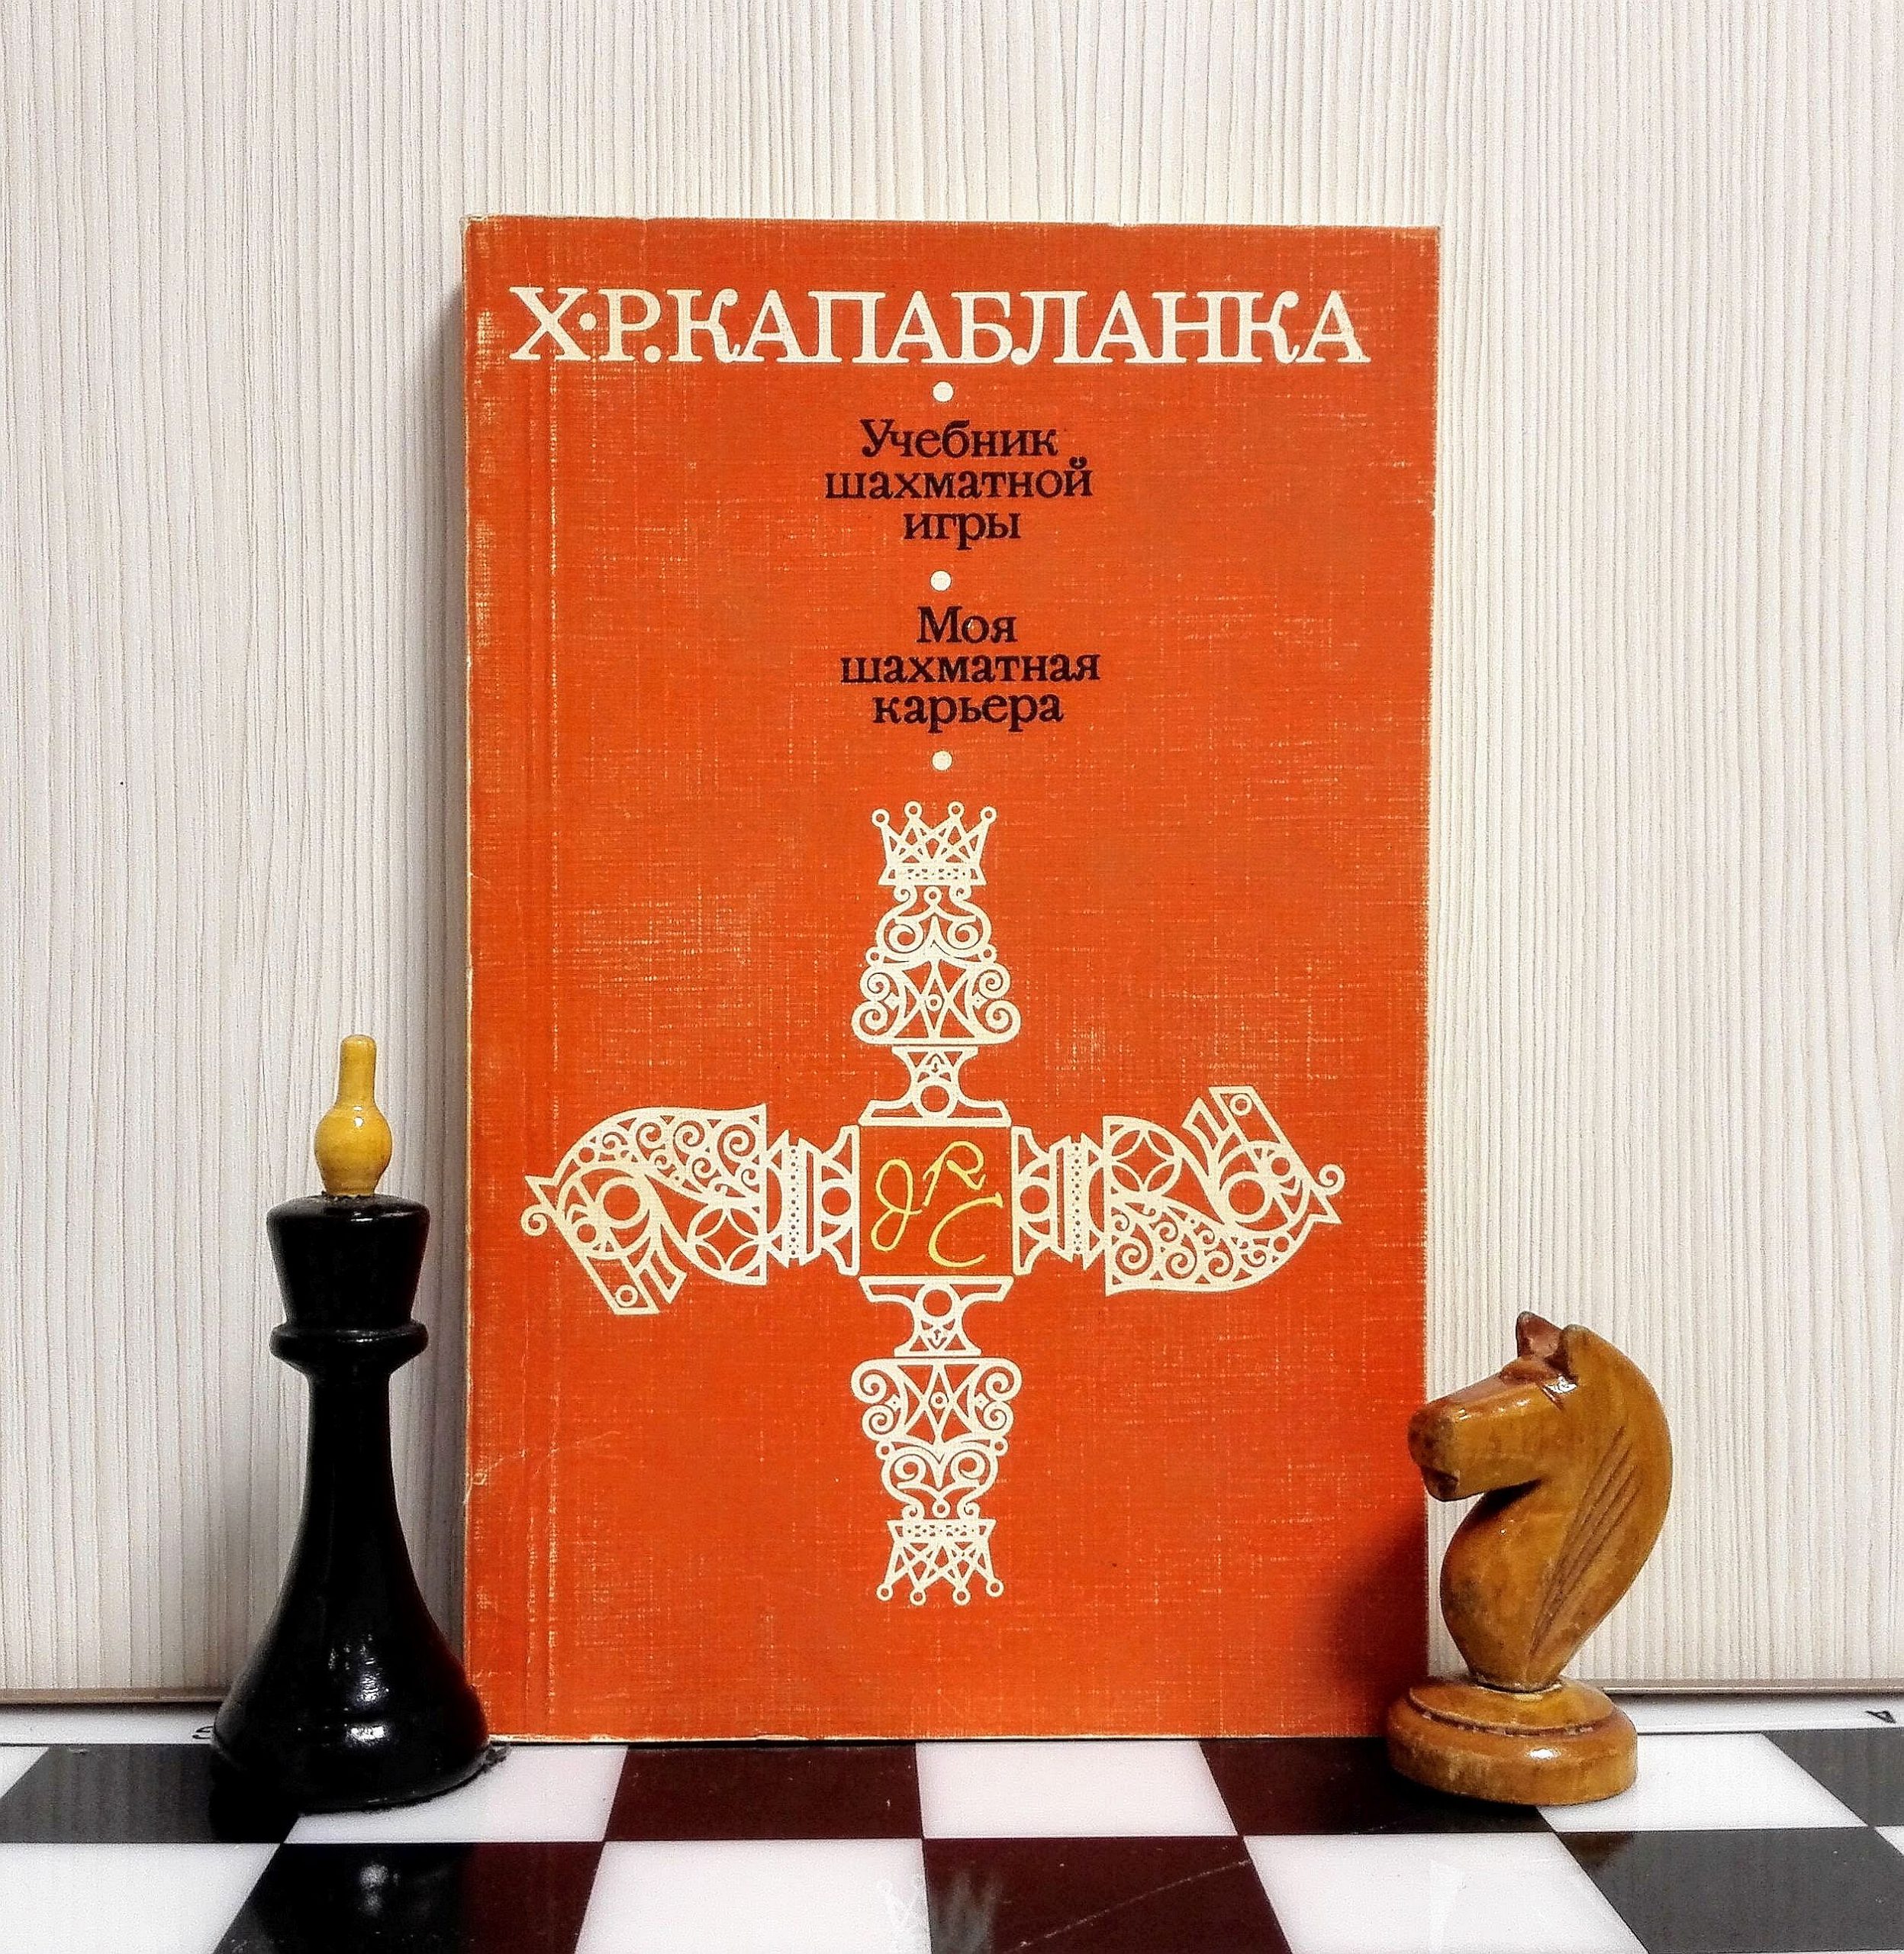 Soviet Chess Book by H. R. Capablanca chess Game 